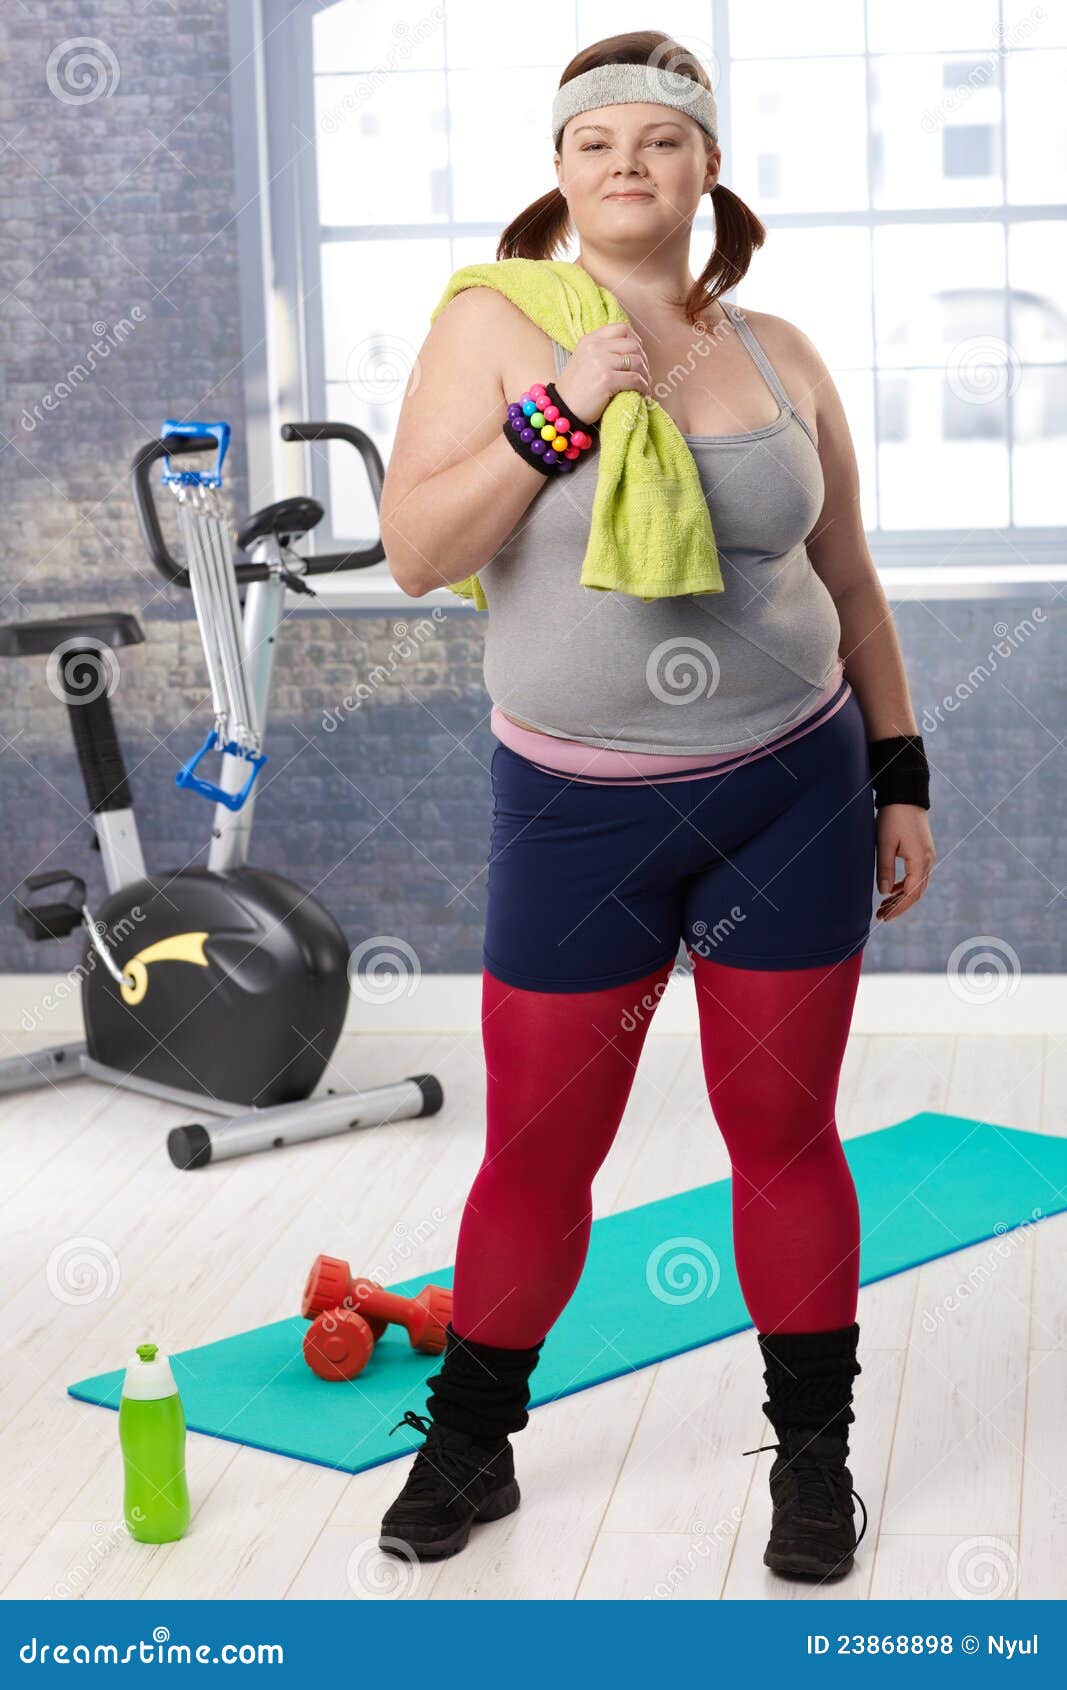 plump young woman at the gym